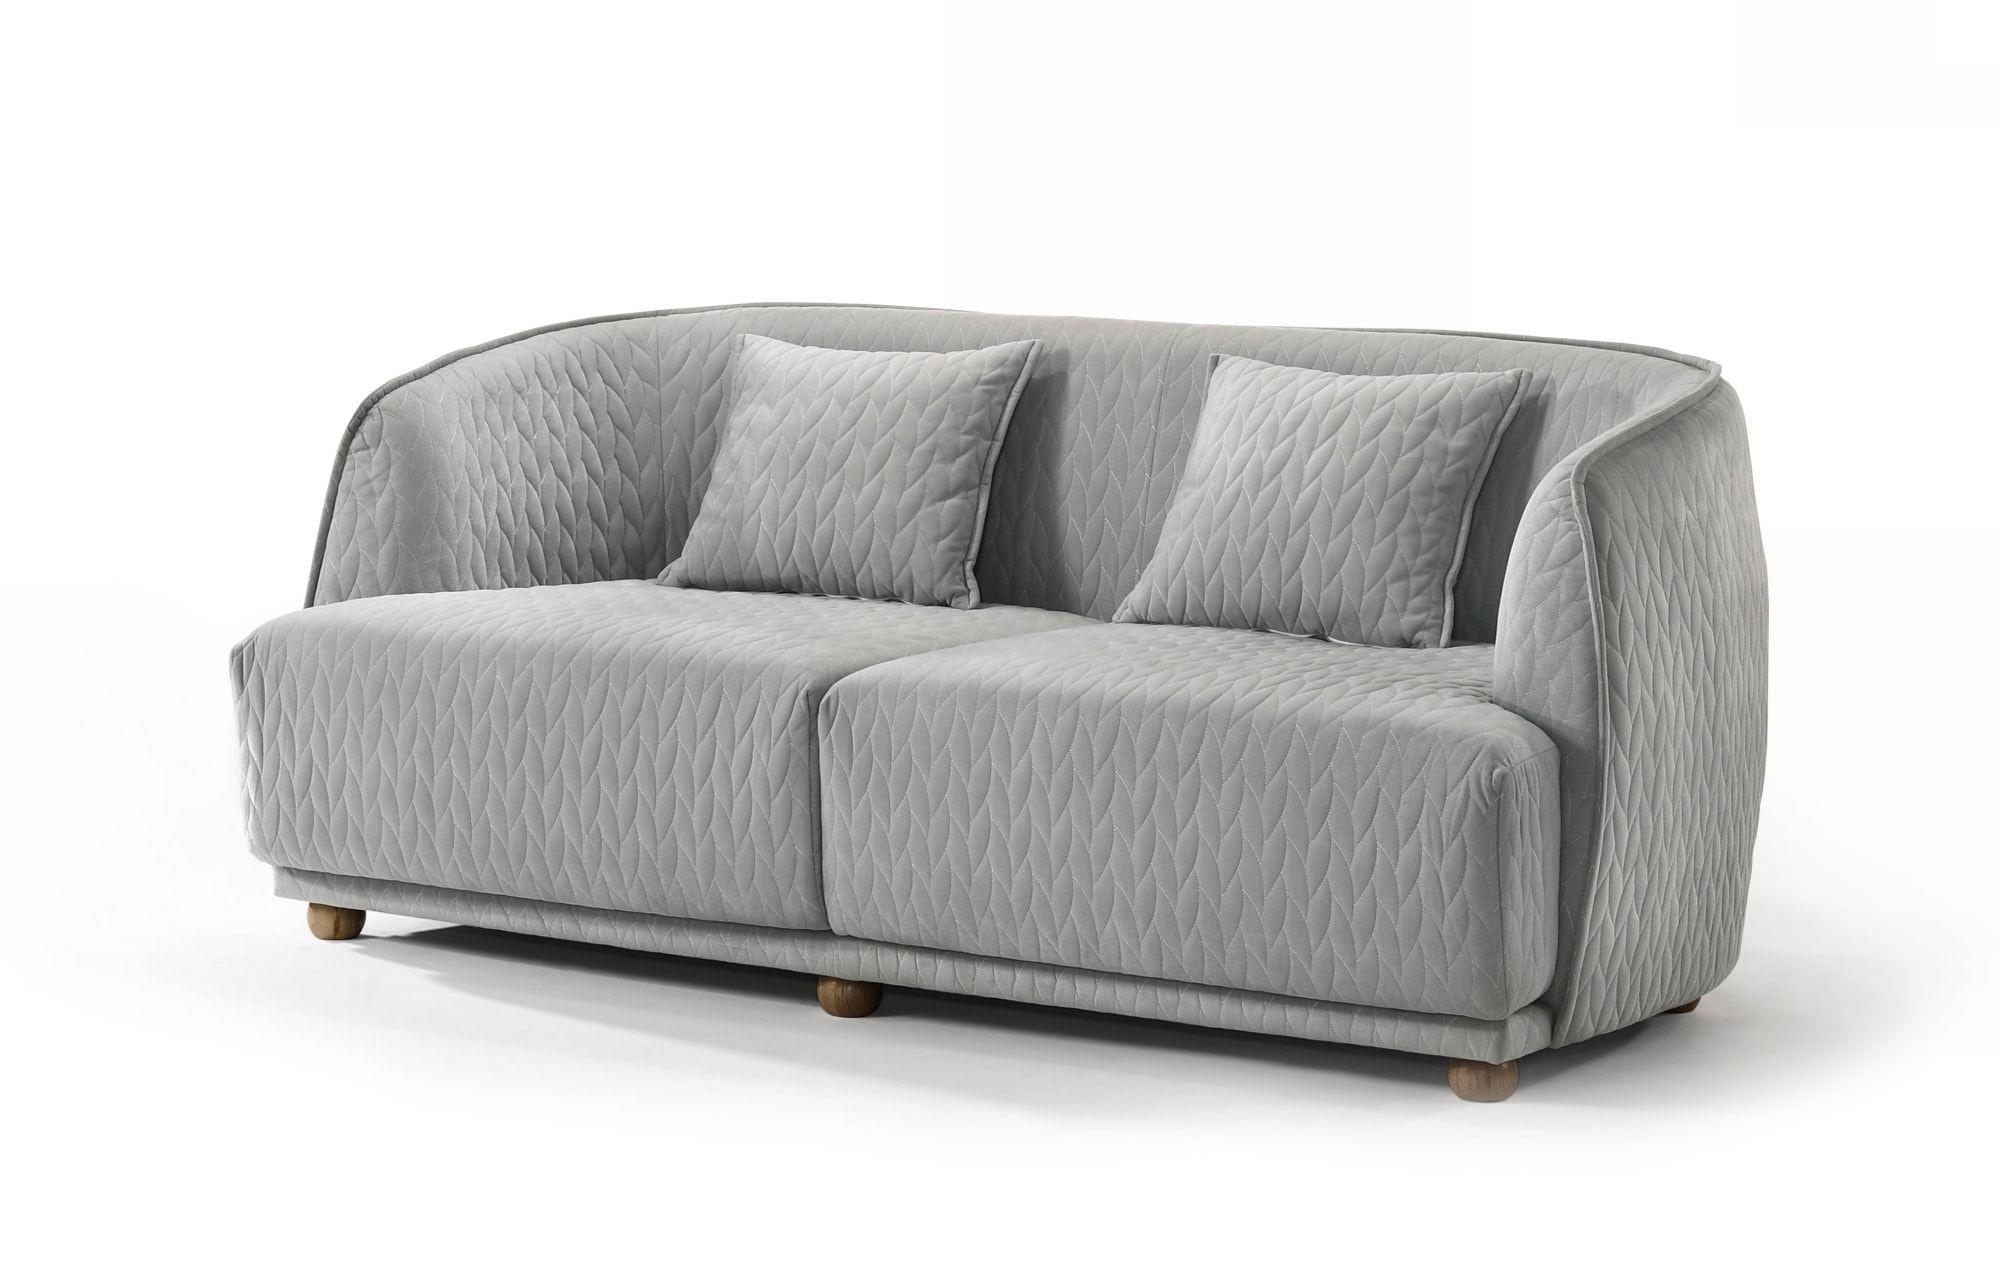 Contemporary, Modern Loveseat VGMAMIS-1-LOVE VGMAMIS-1-LOVE in Gray Fabric